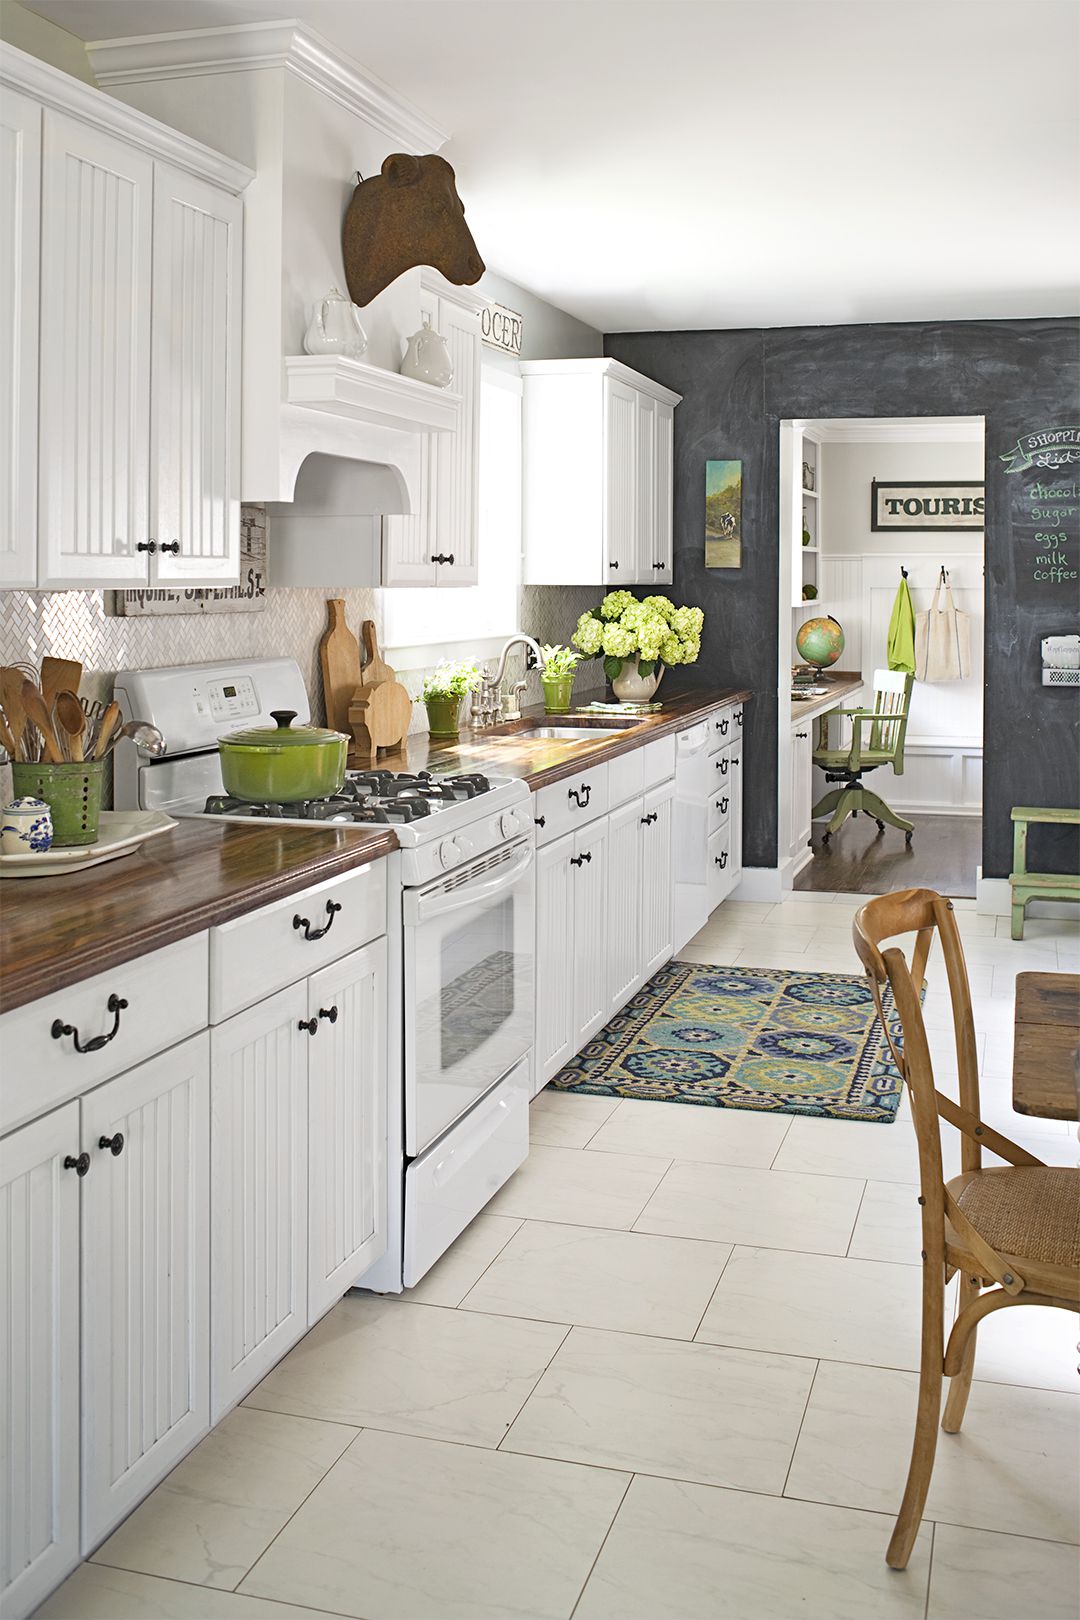 9 Conceal clutter in a utility room